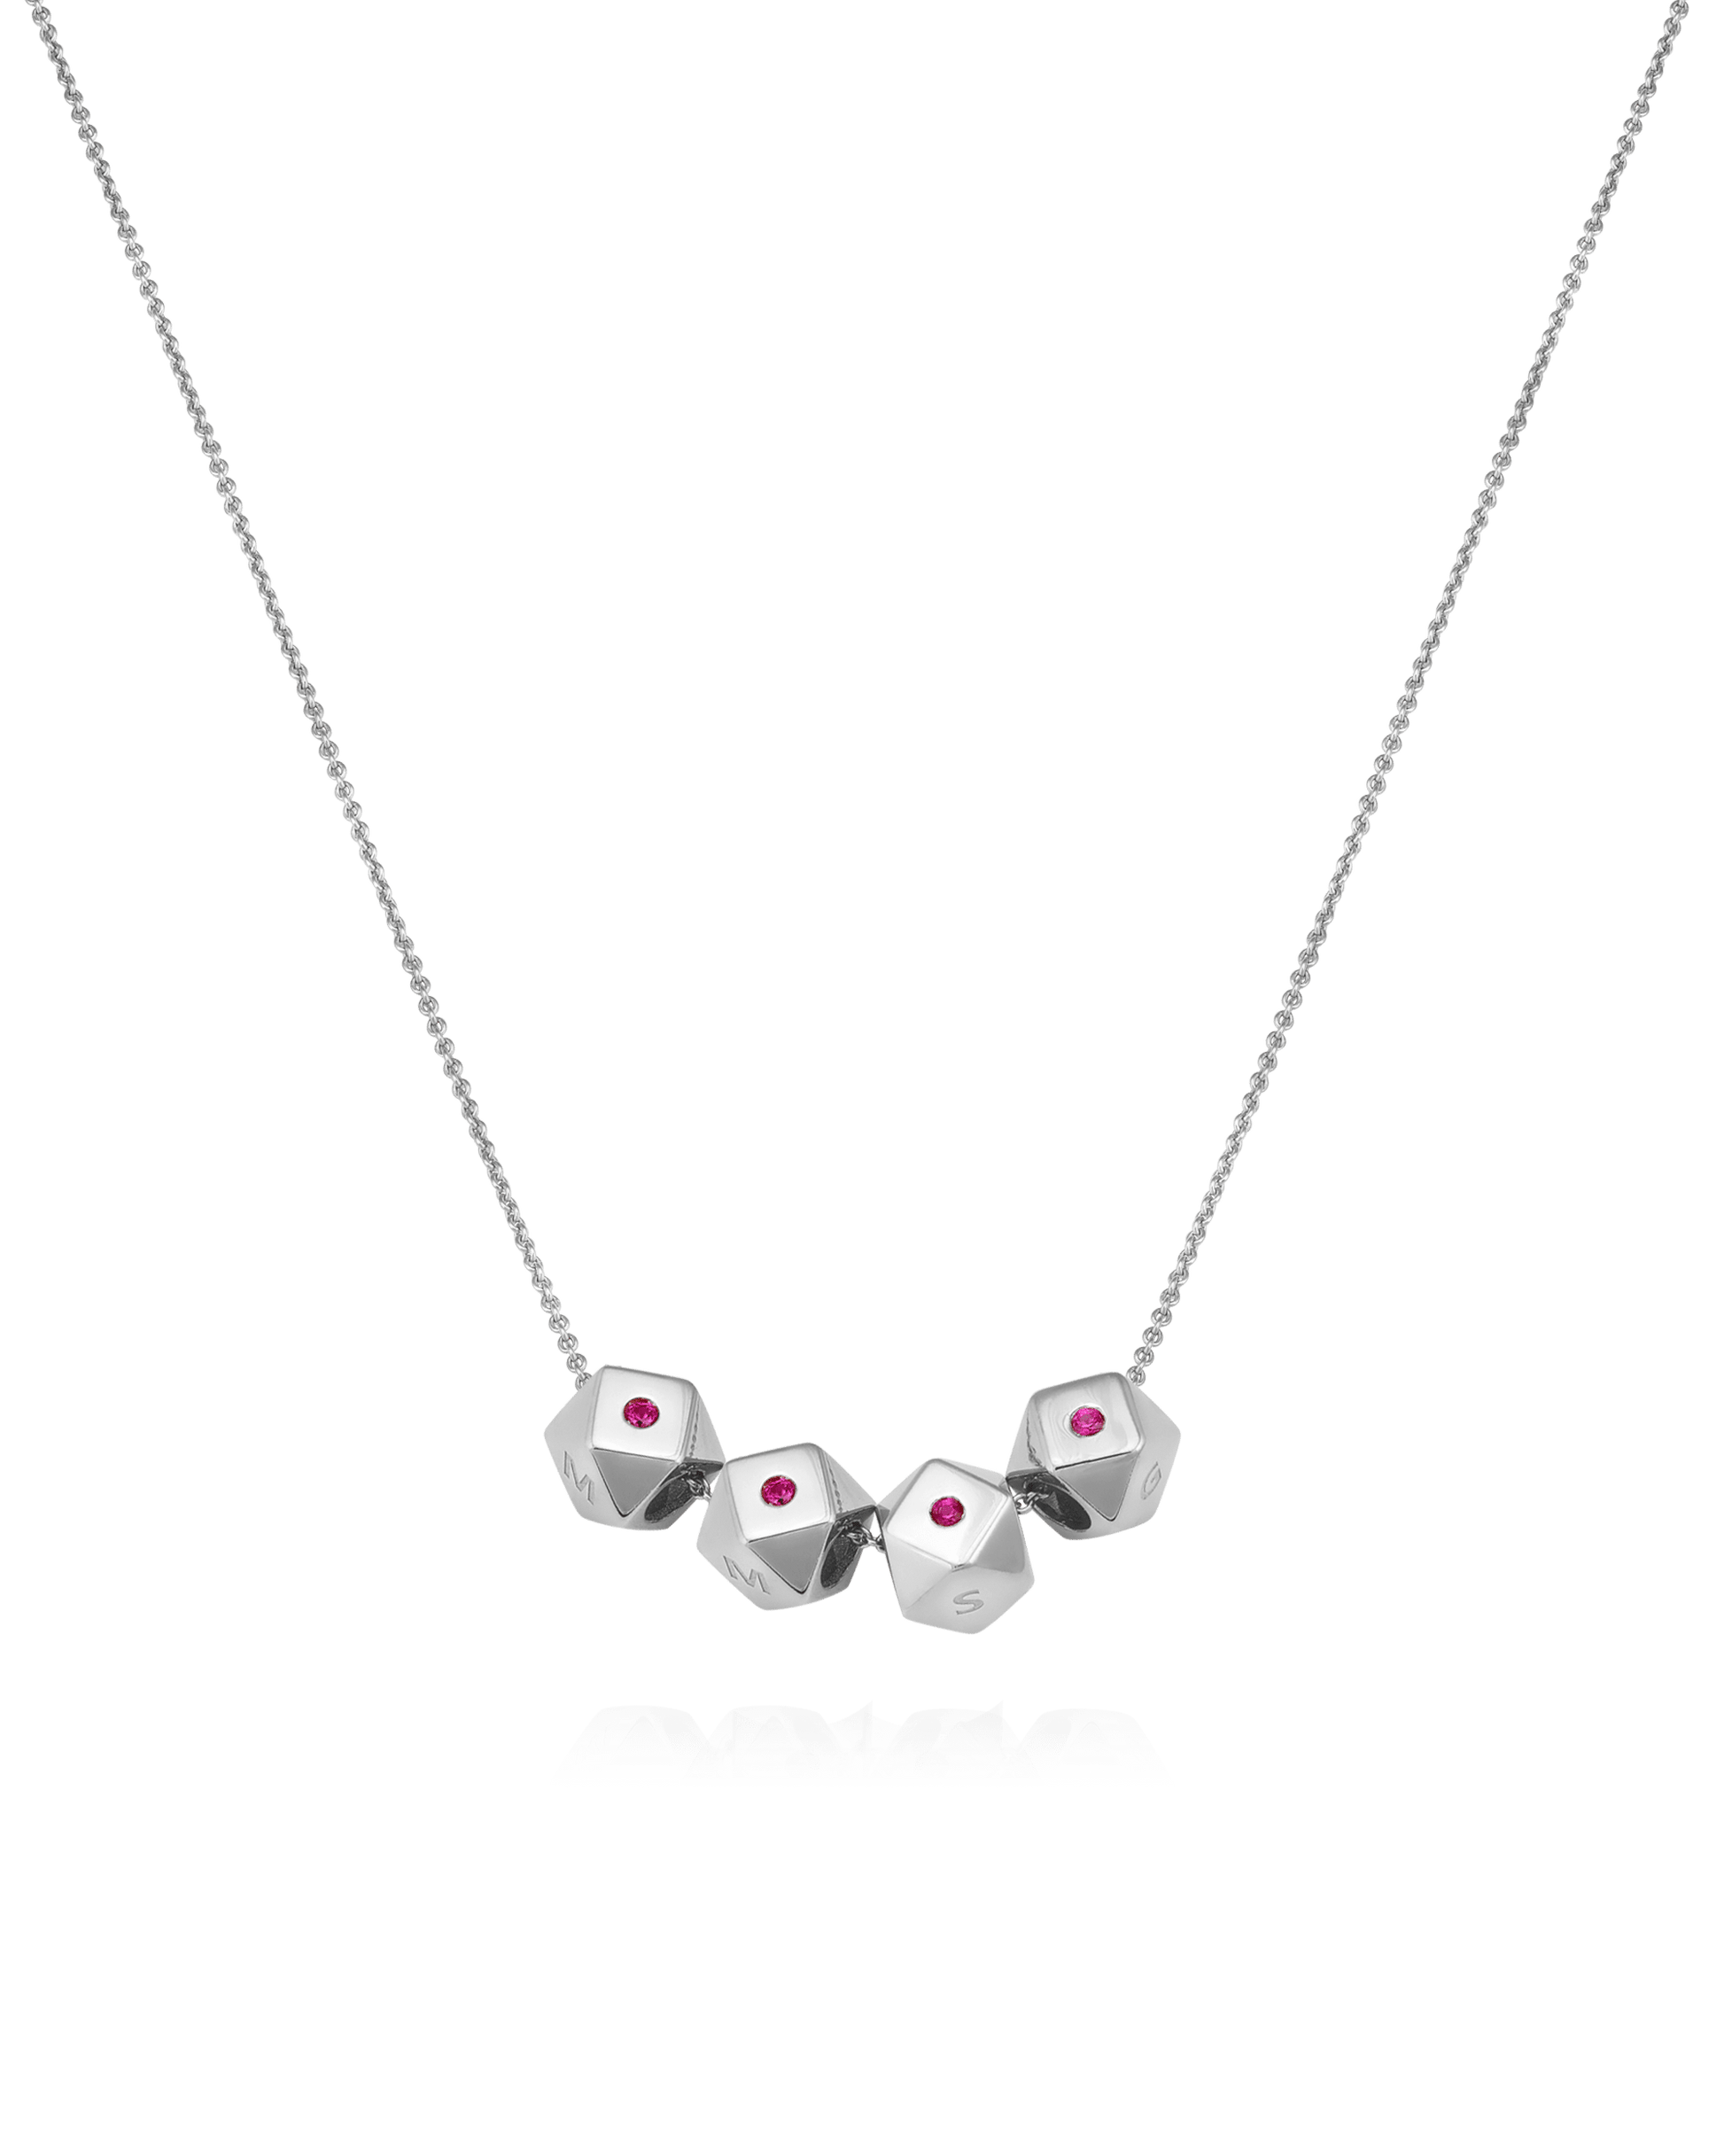 Hedra Necklace - 925 Sterling Silver Necklaces magal-dev 4 Charms 16”+2” extender 